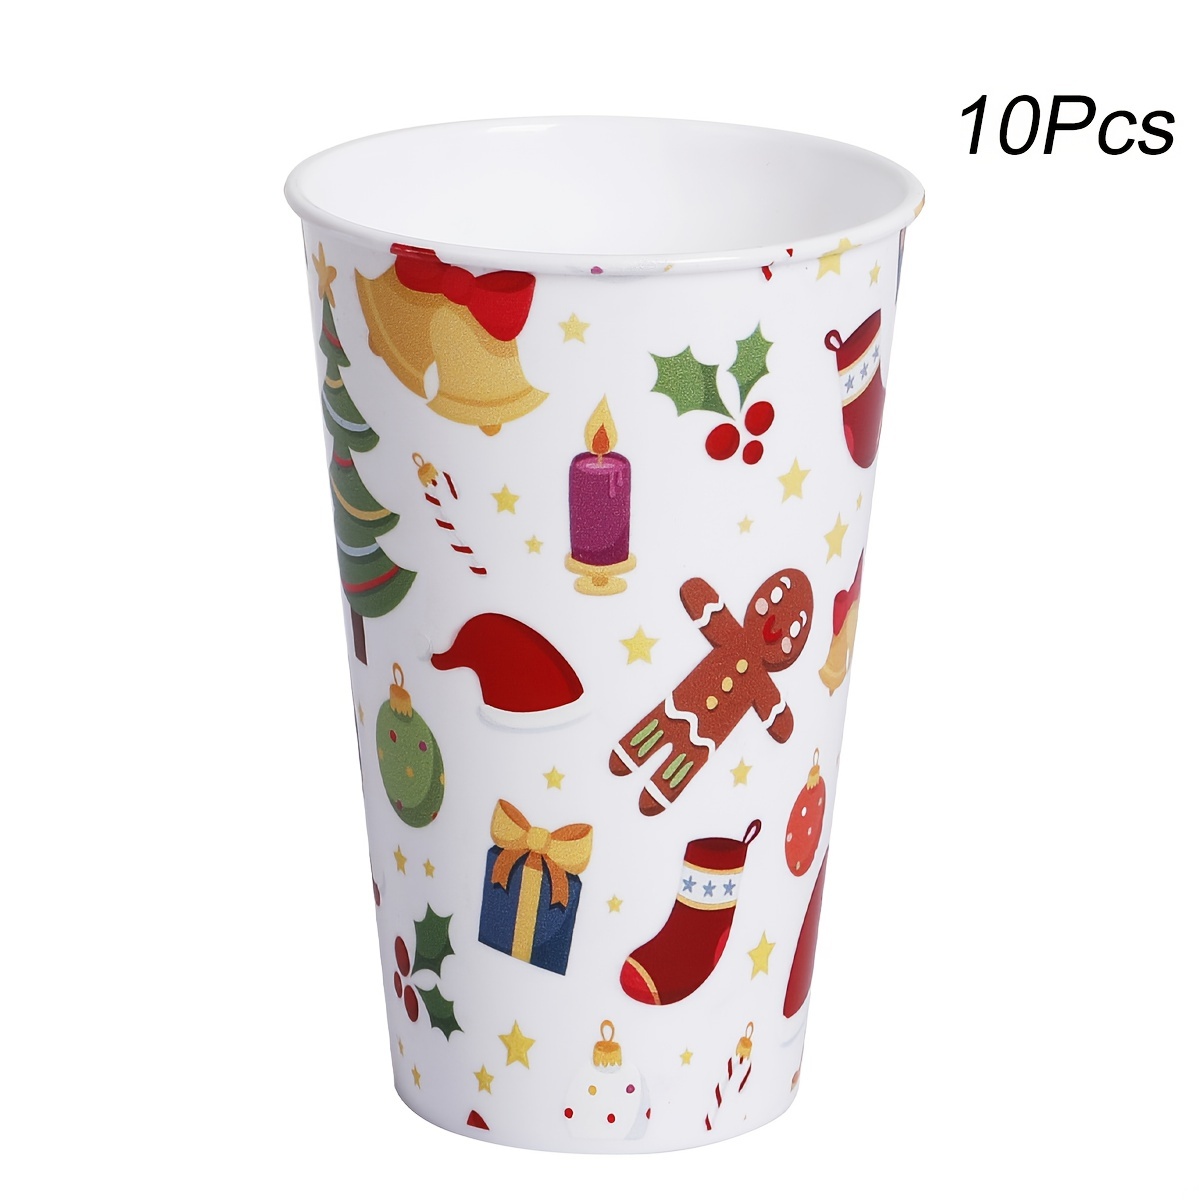 10 Pcs Christmas Plastic Water Cups,12oz Reusable Party Cups for